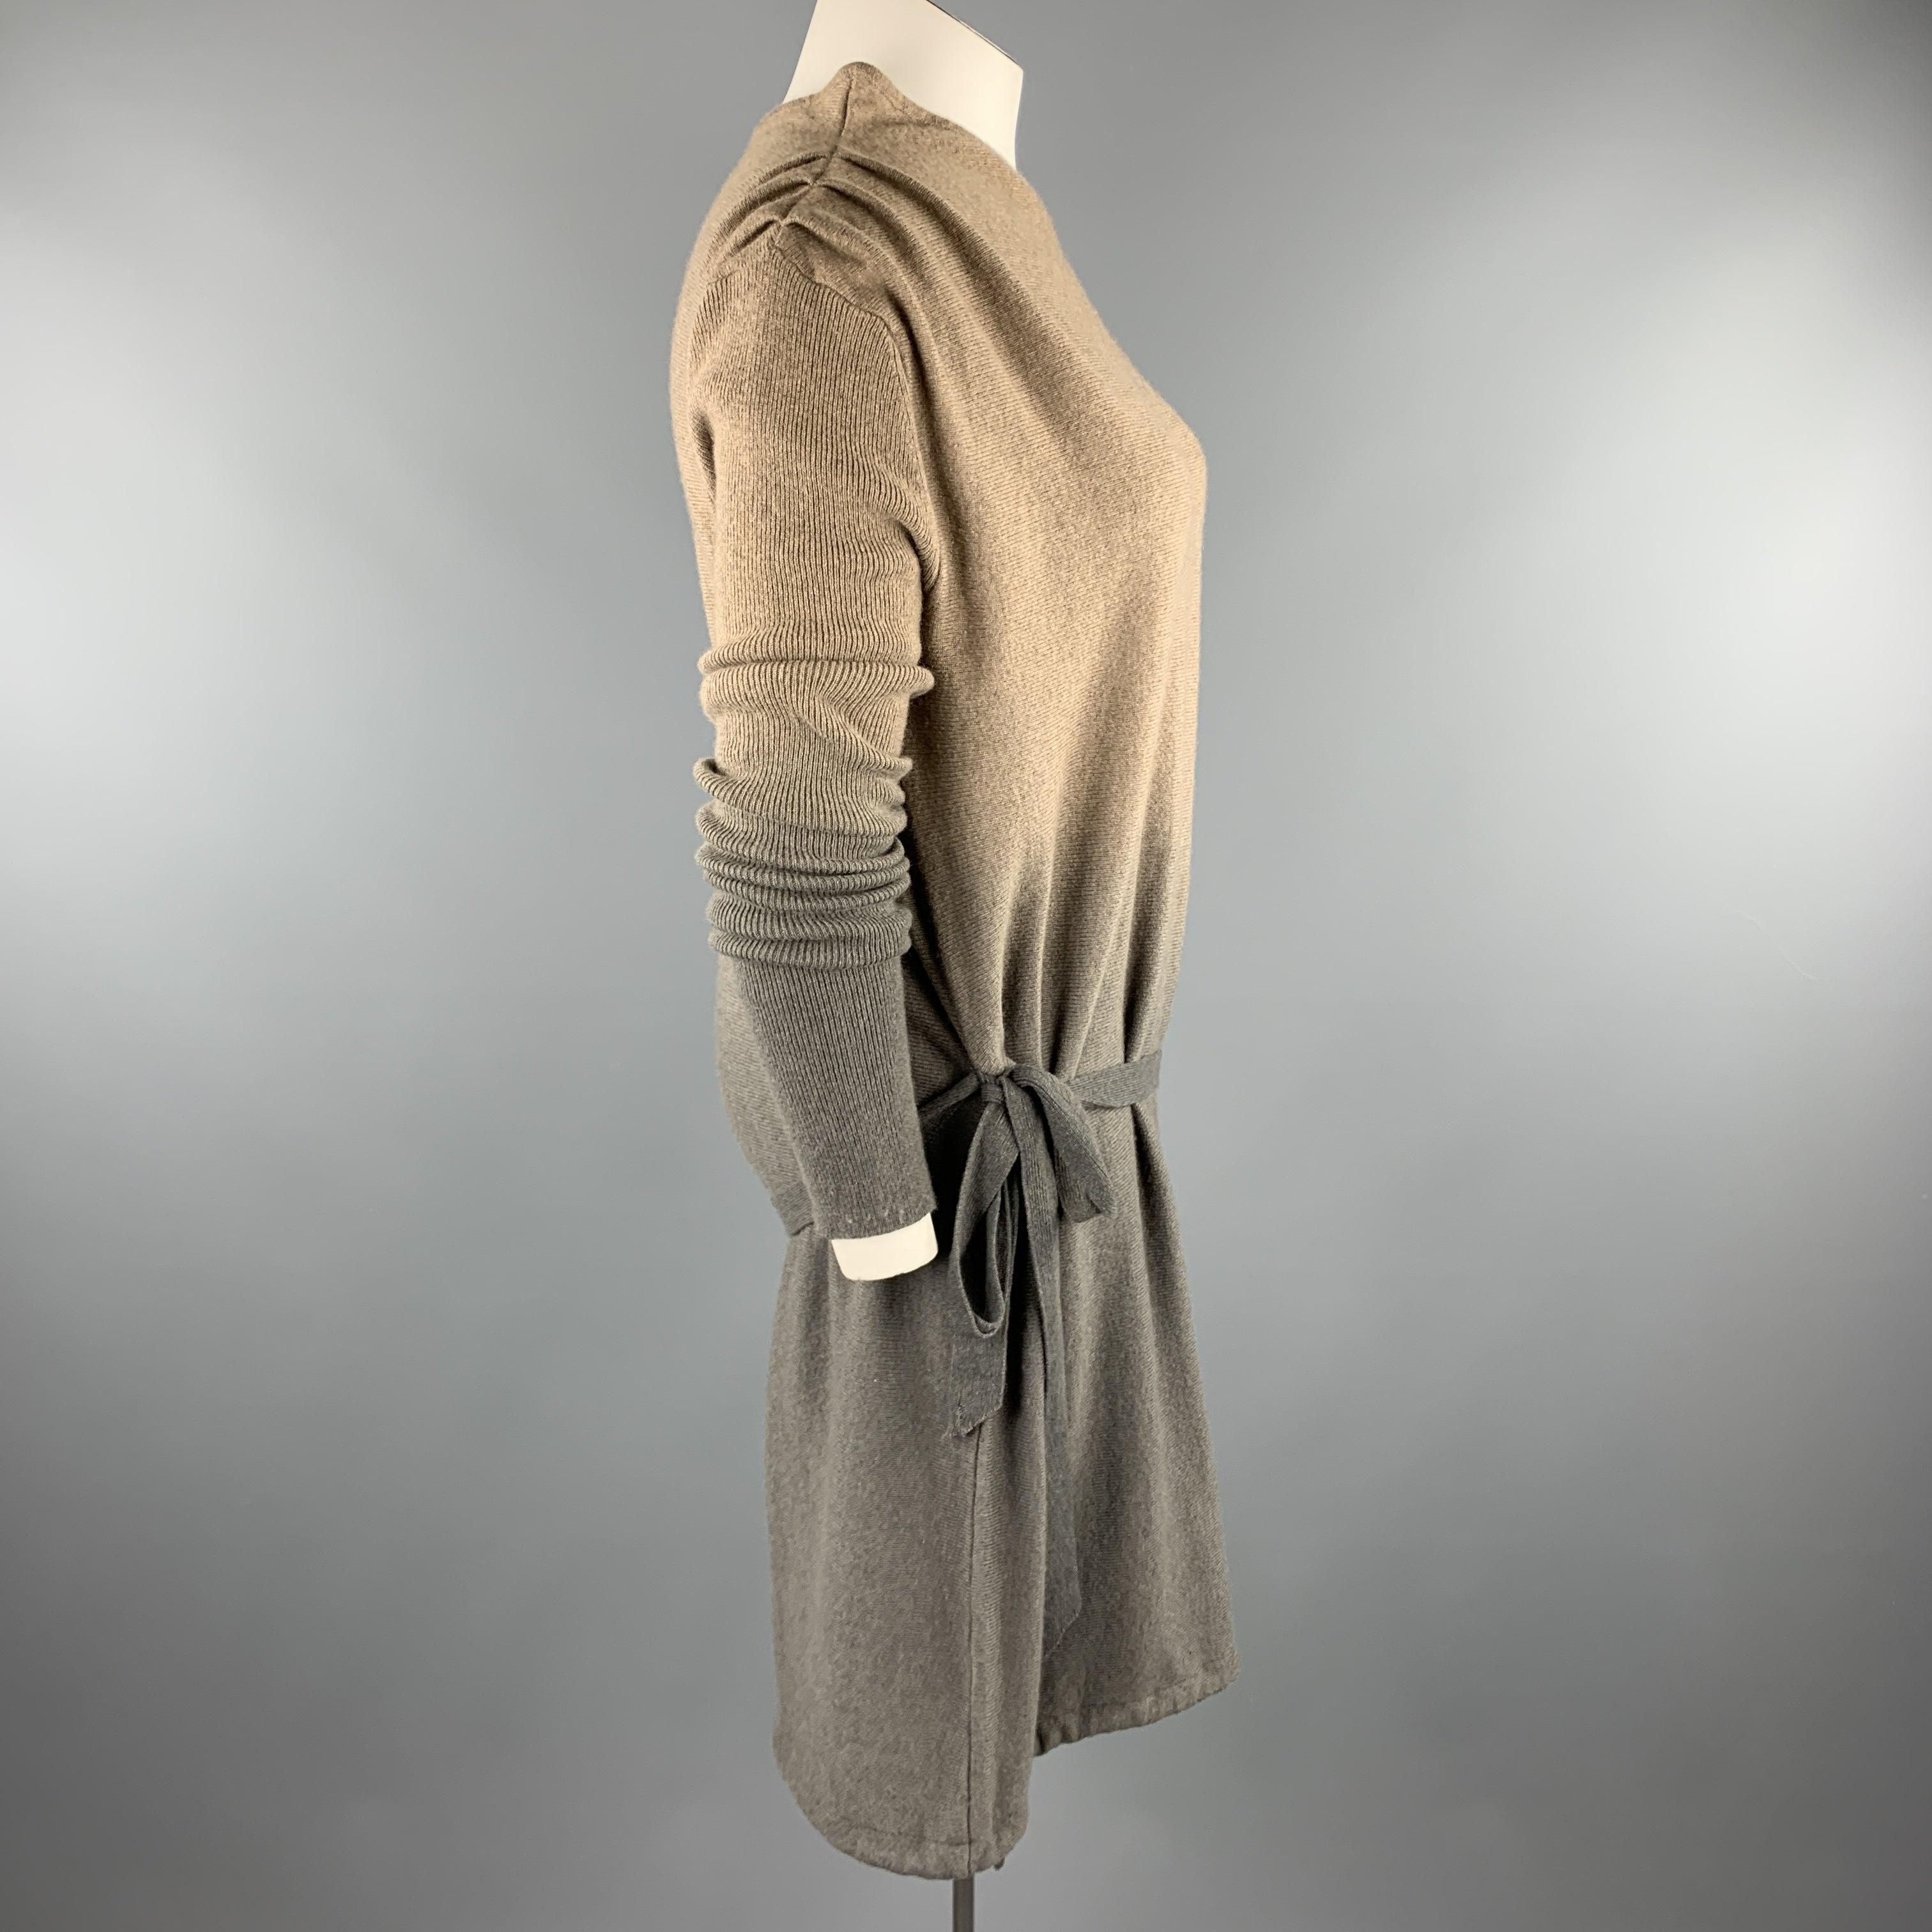 Women's HENRY BEGUELIN Size M Taupe & Grey Ombre Asymmetrical Cashmere Dress For Sale